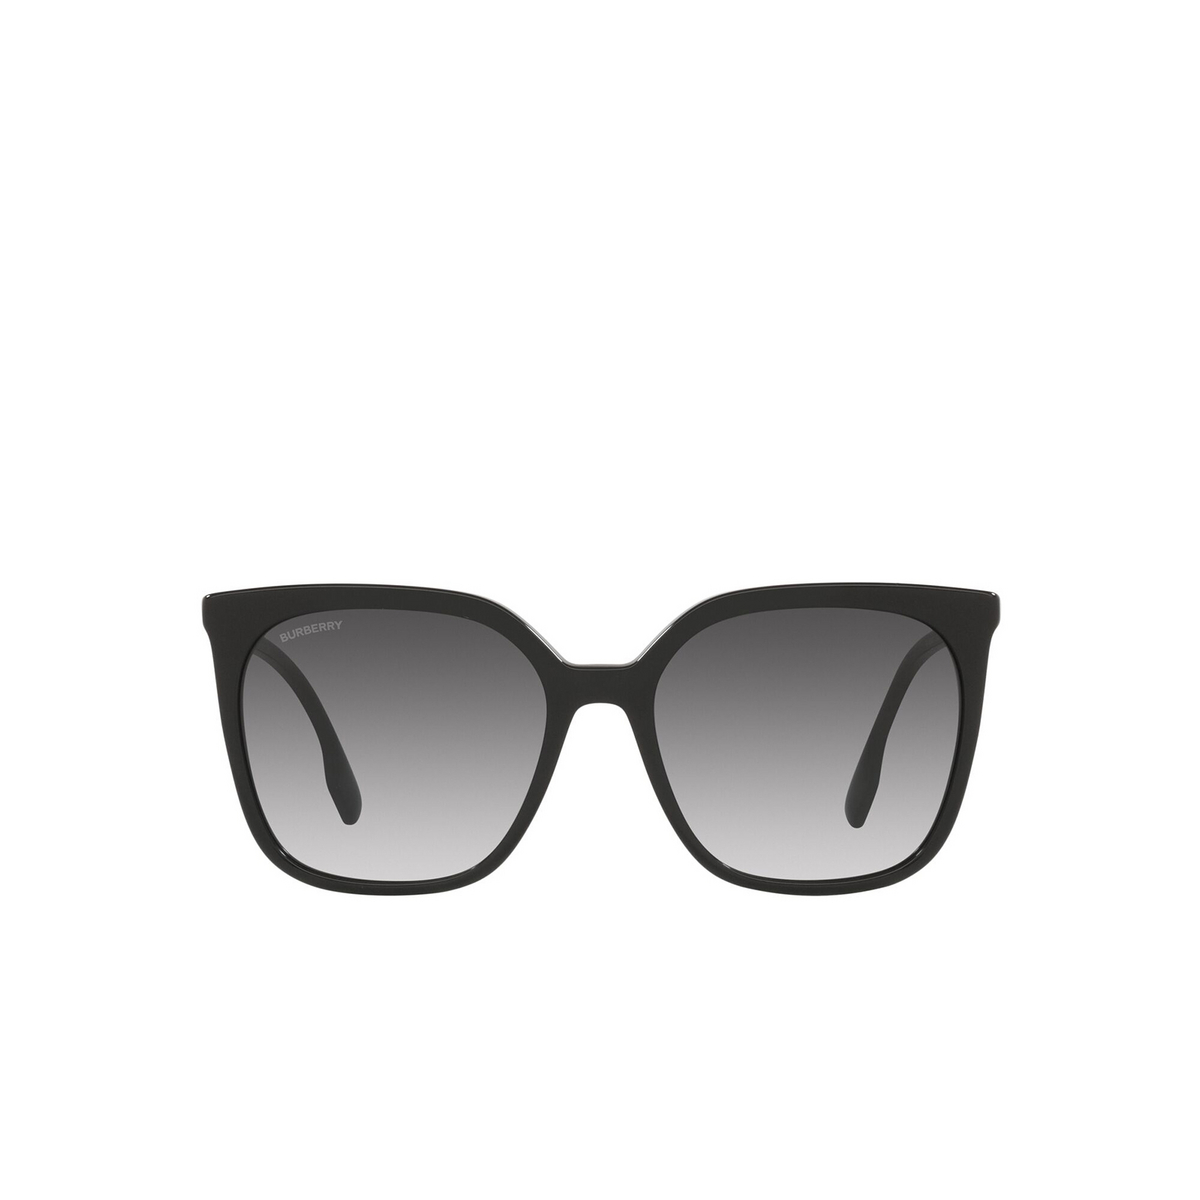 Burberry EMILY Sunglasses 30018G Black - front view